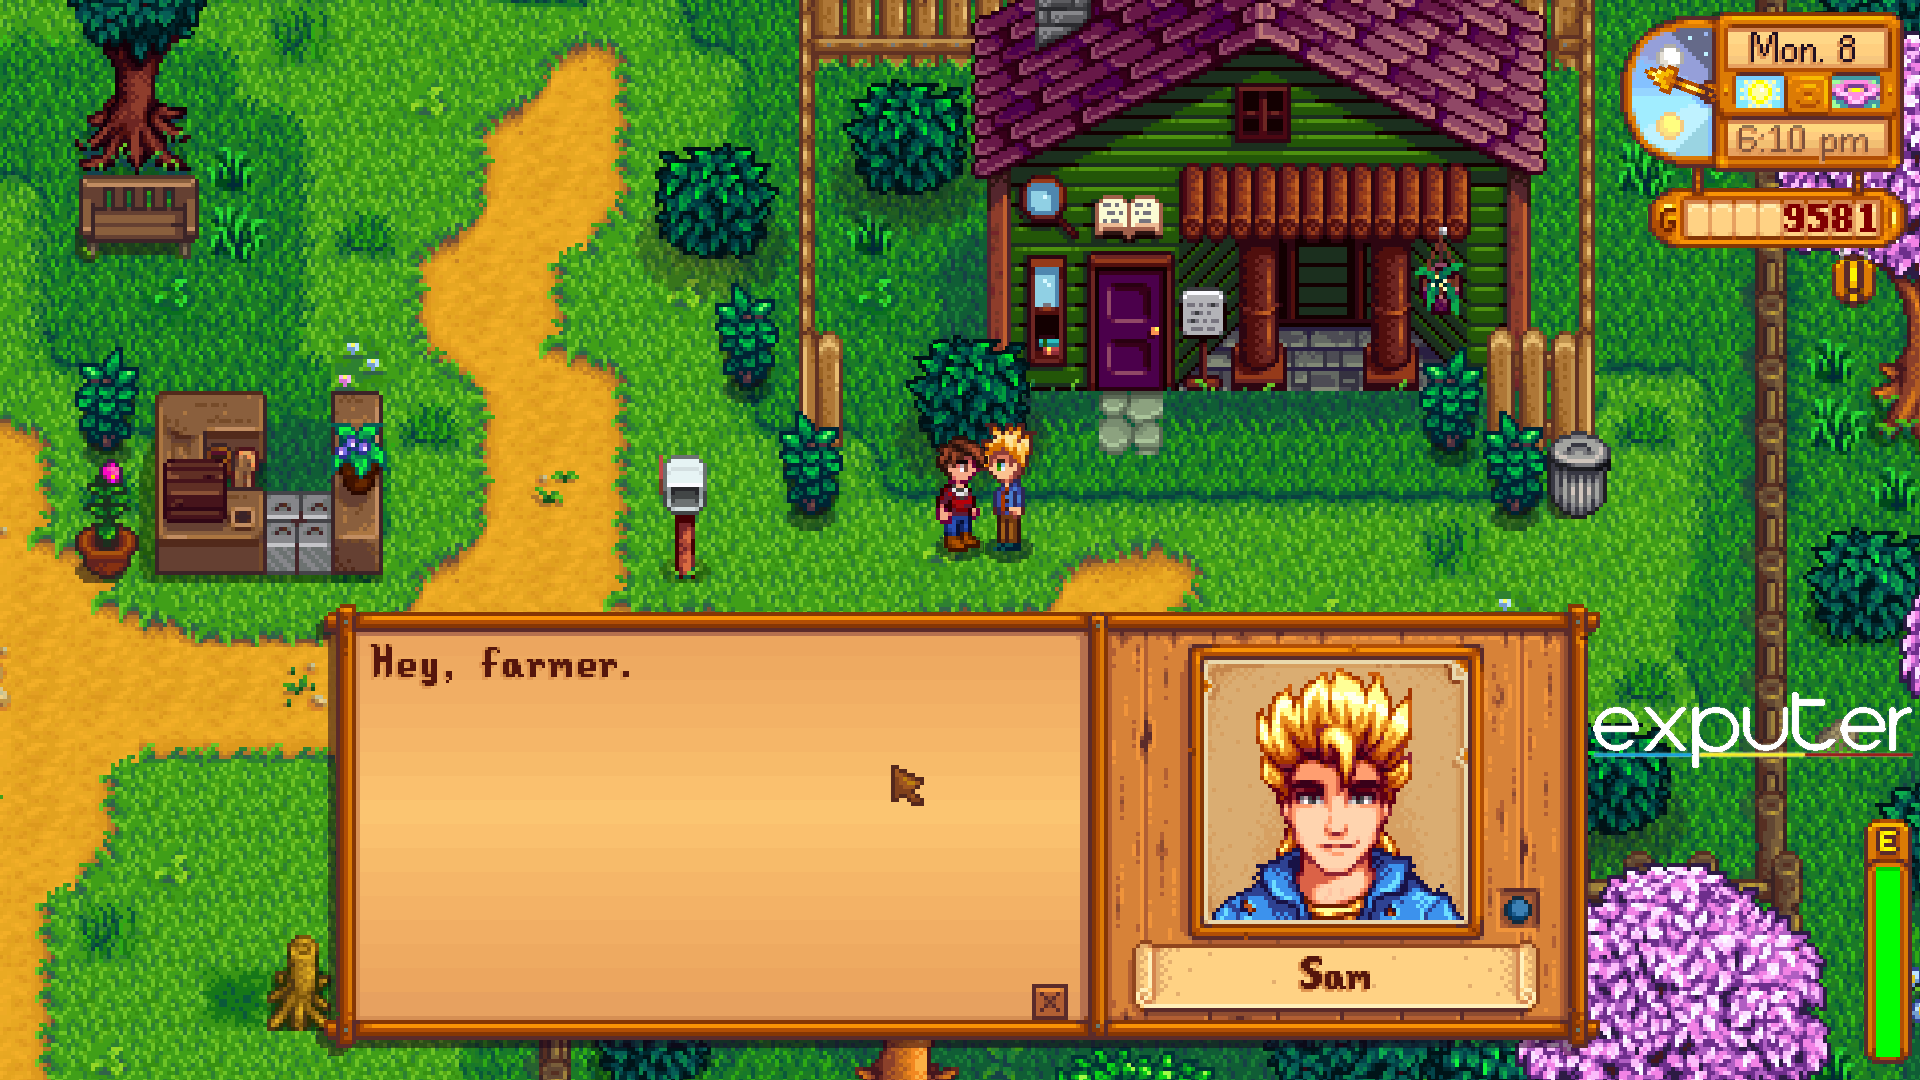 Stardew Valley Same's Dialogue and Personality